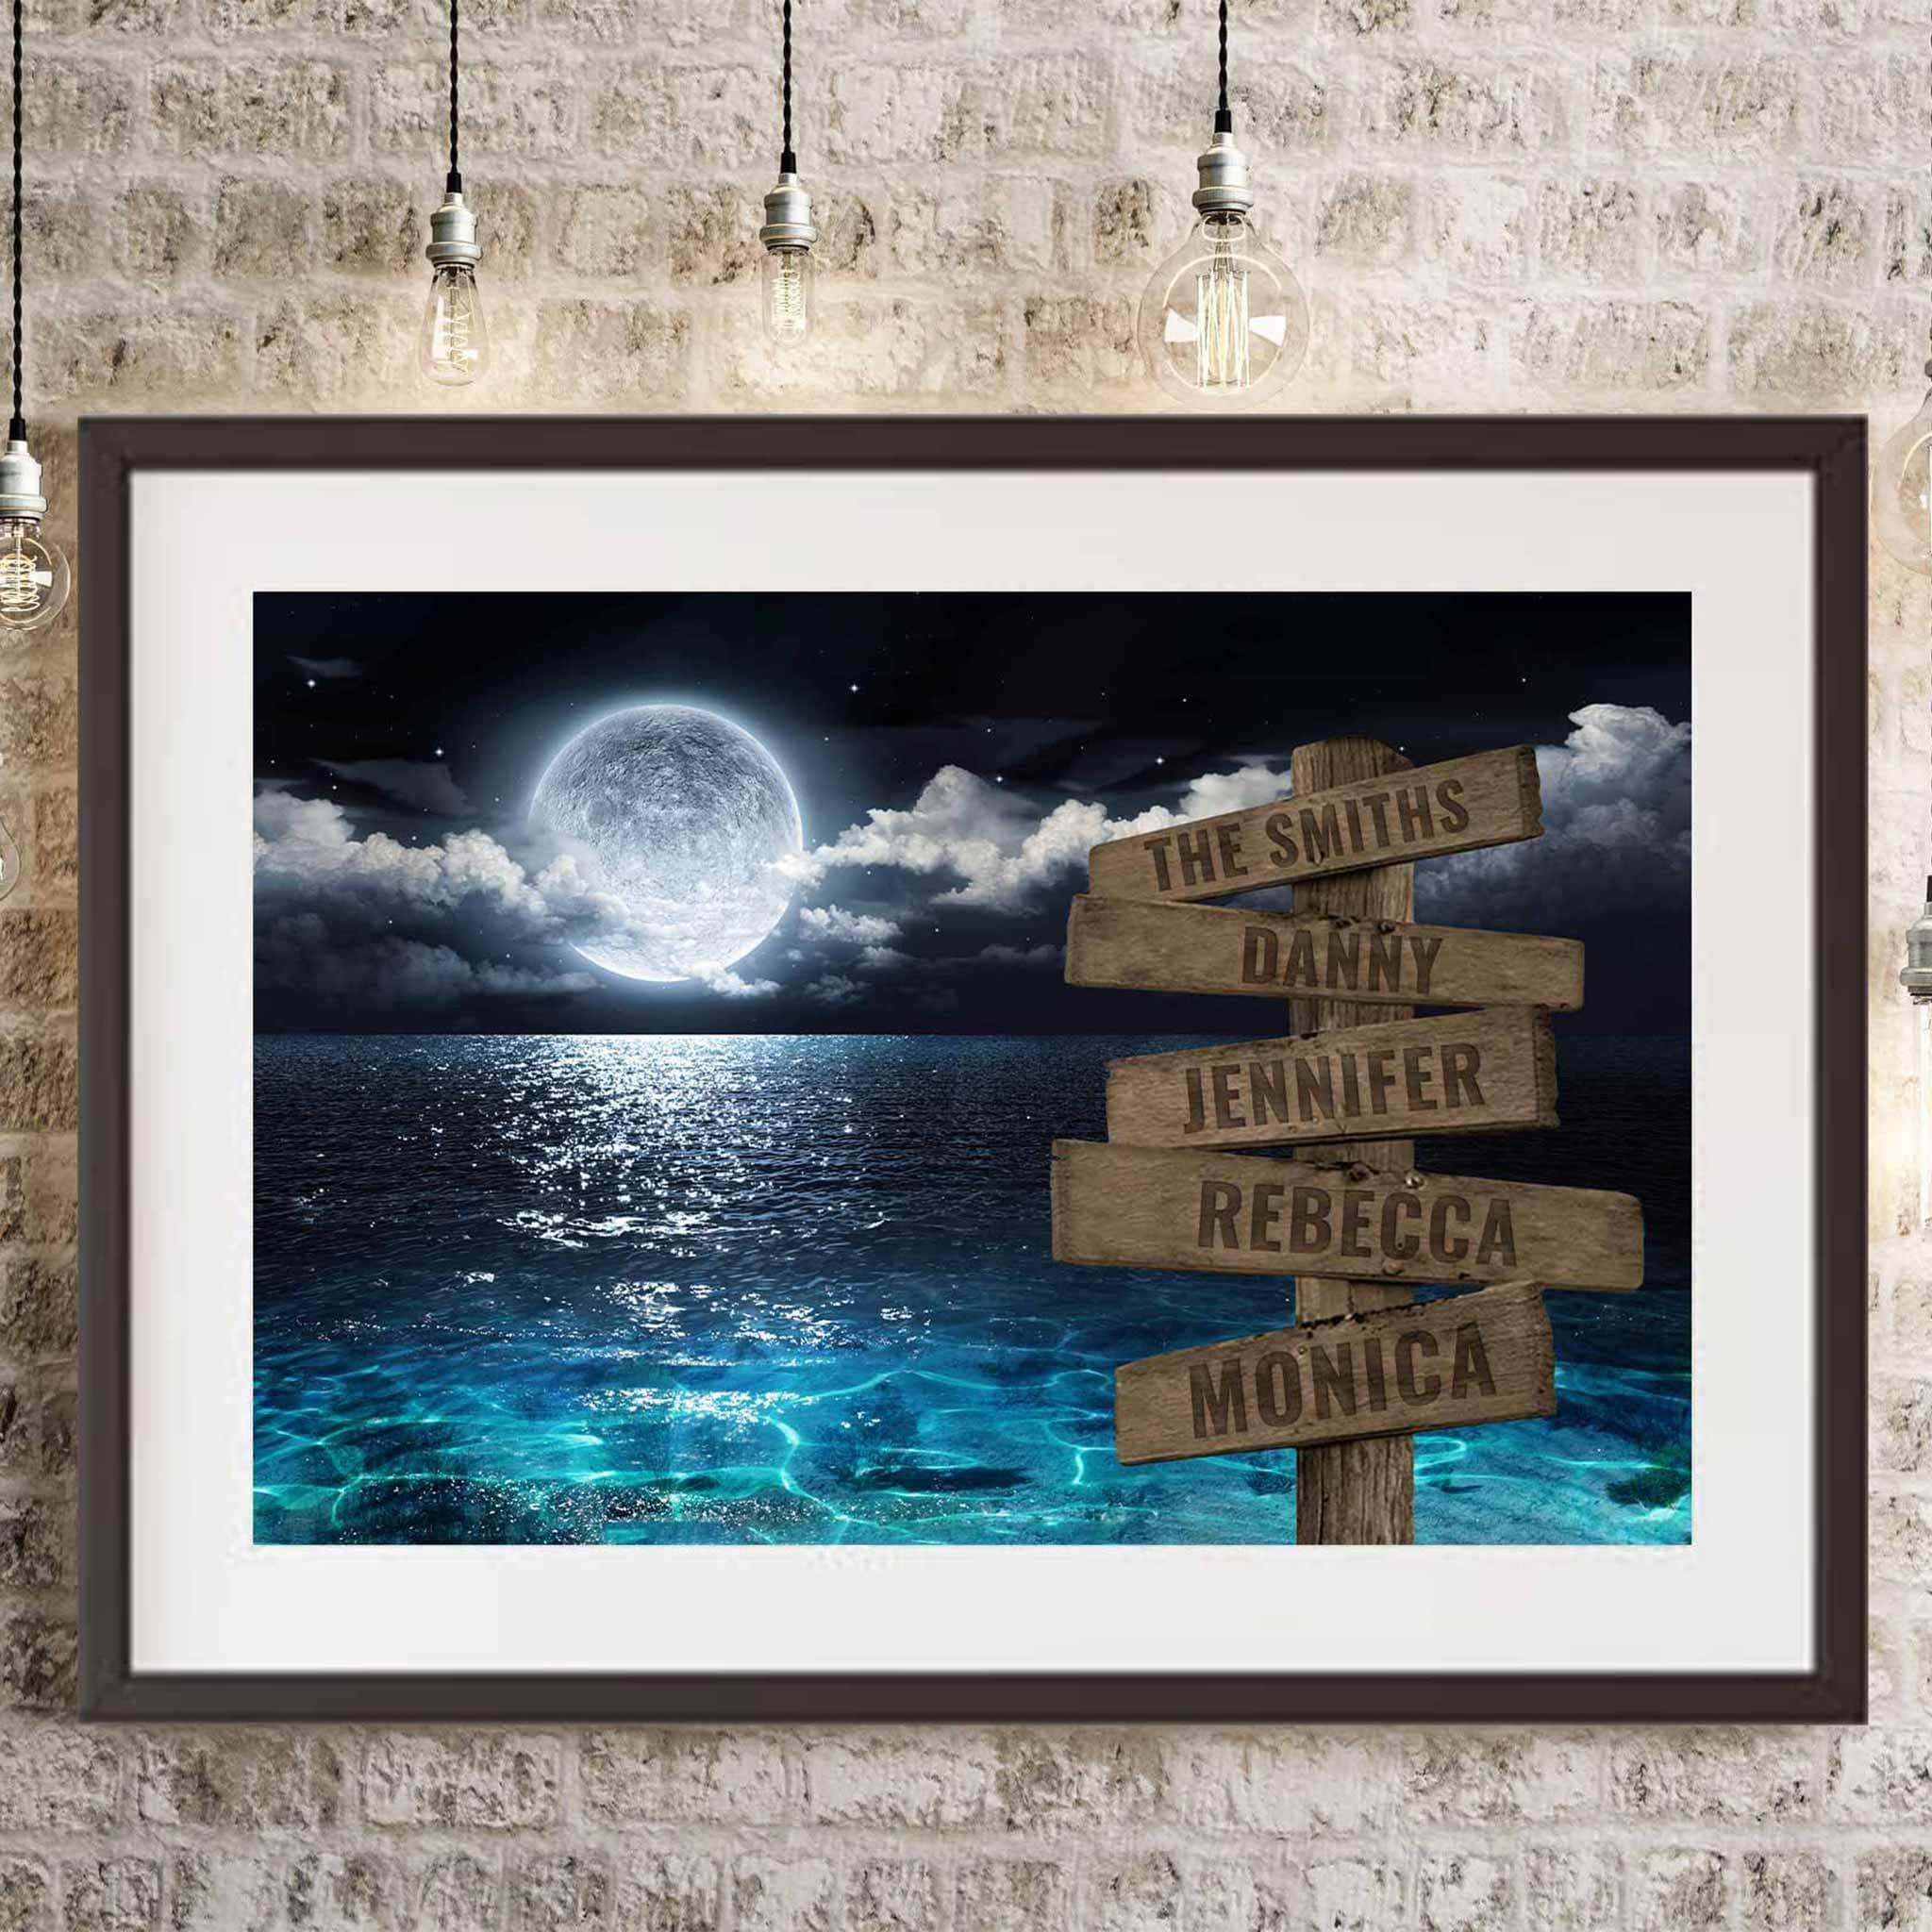 Full Moon Ocean Nightscape v1 Multiple Names Personalized Directional Sign PosterCustomly Gifts